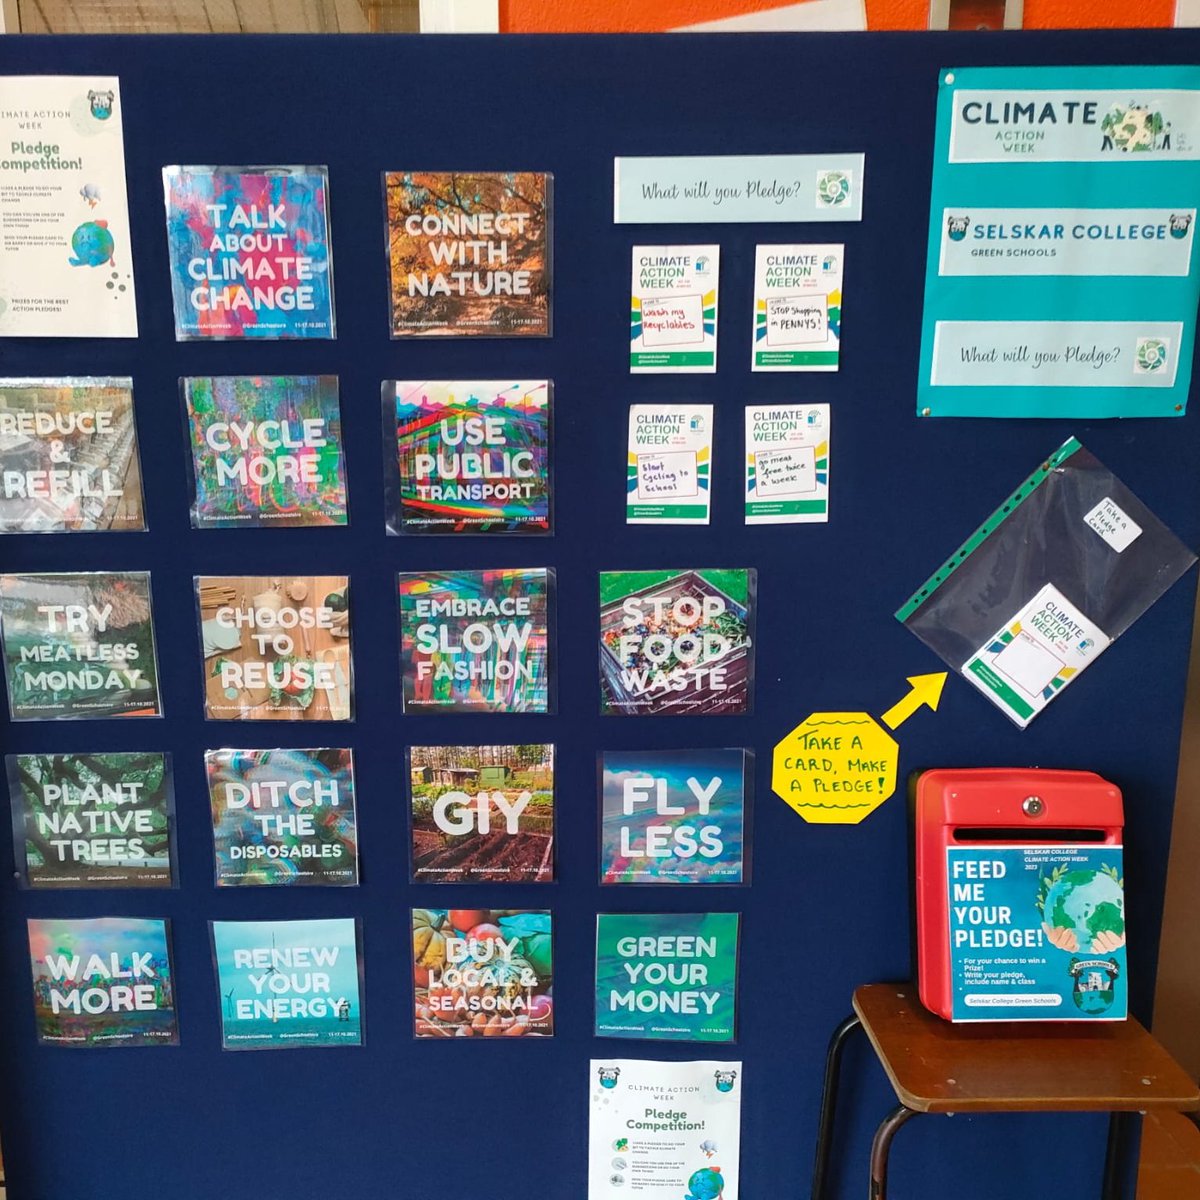 To bring #climateactionweek to a close our Green schools team reviewed our #Climatepledge display. With over 100 pledges the commitment was clear. Well done to those who made their pledge!
@climate_ambass @Take1_Programme @GreenSchoolsIre #selskarstyle #care
#wwetb @wexfordcoco